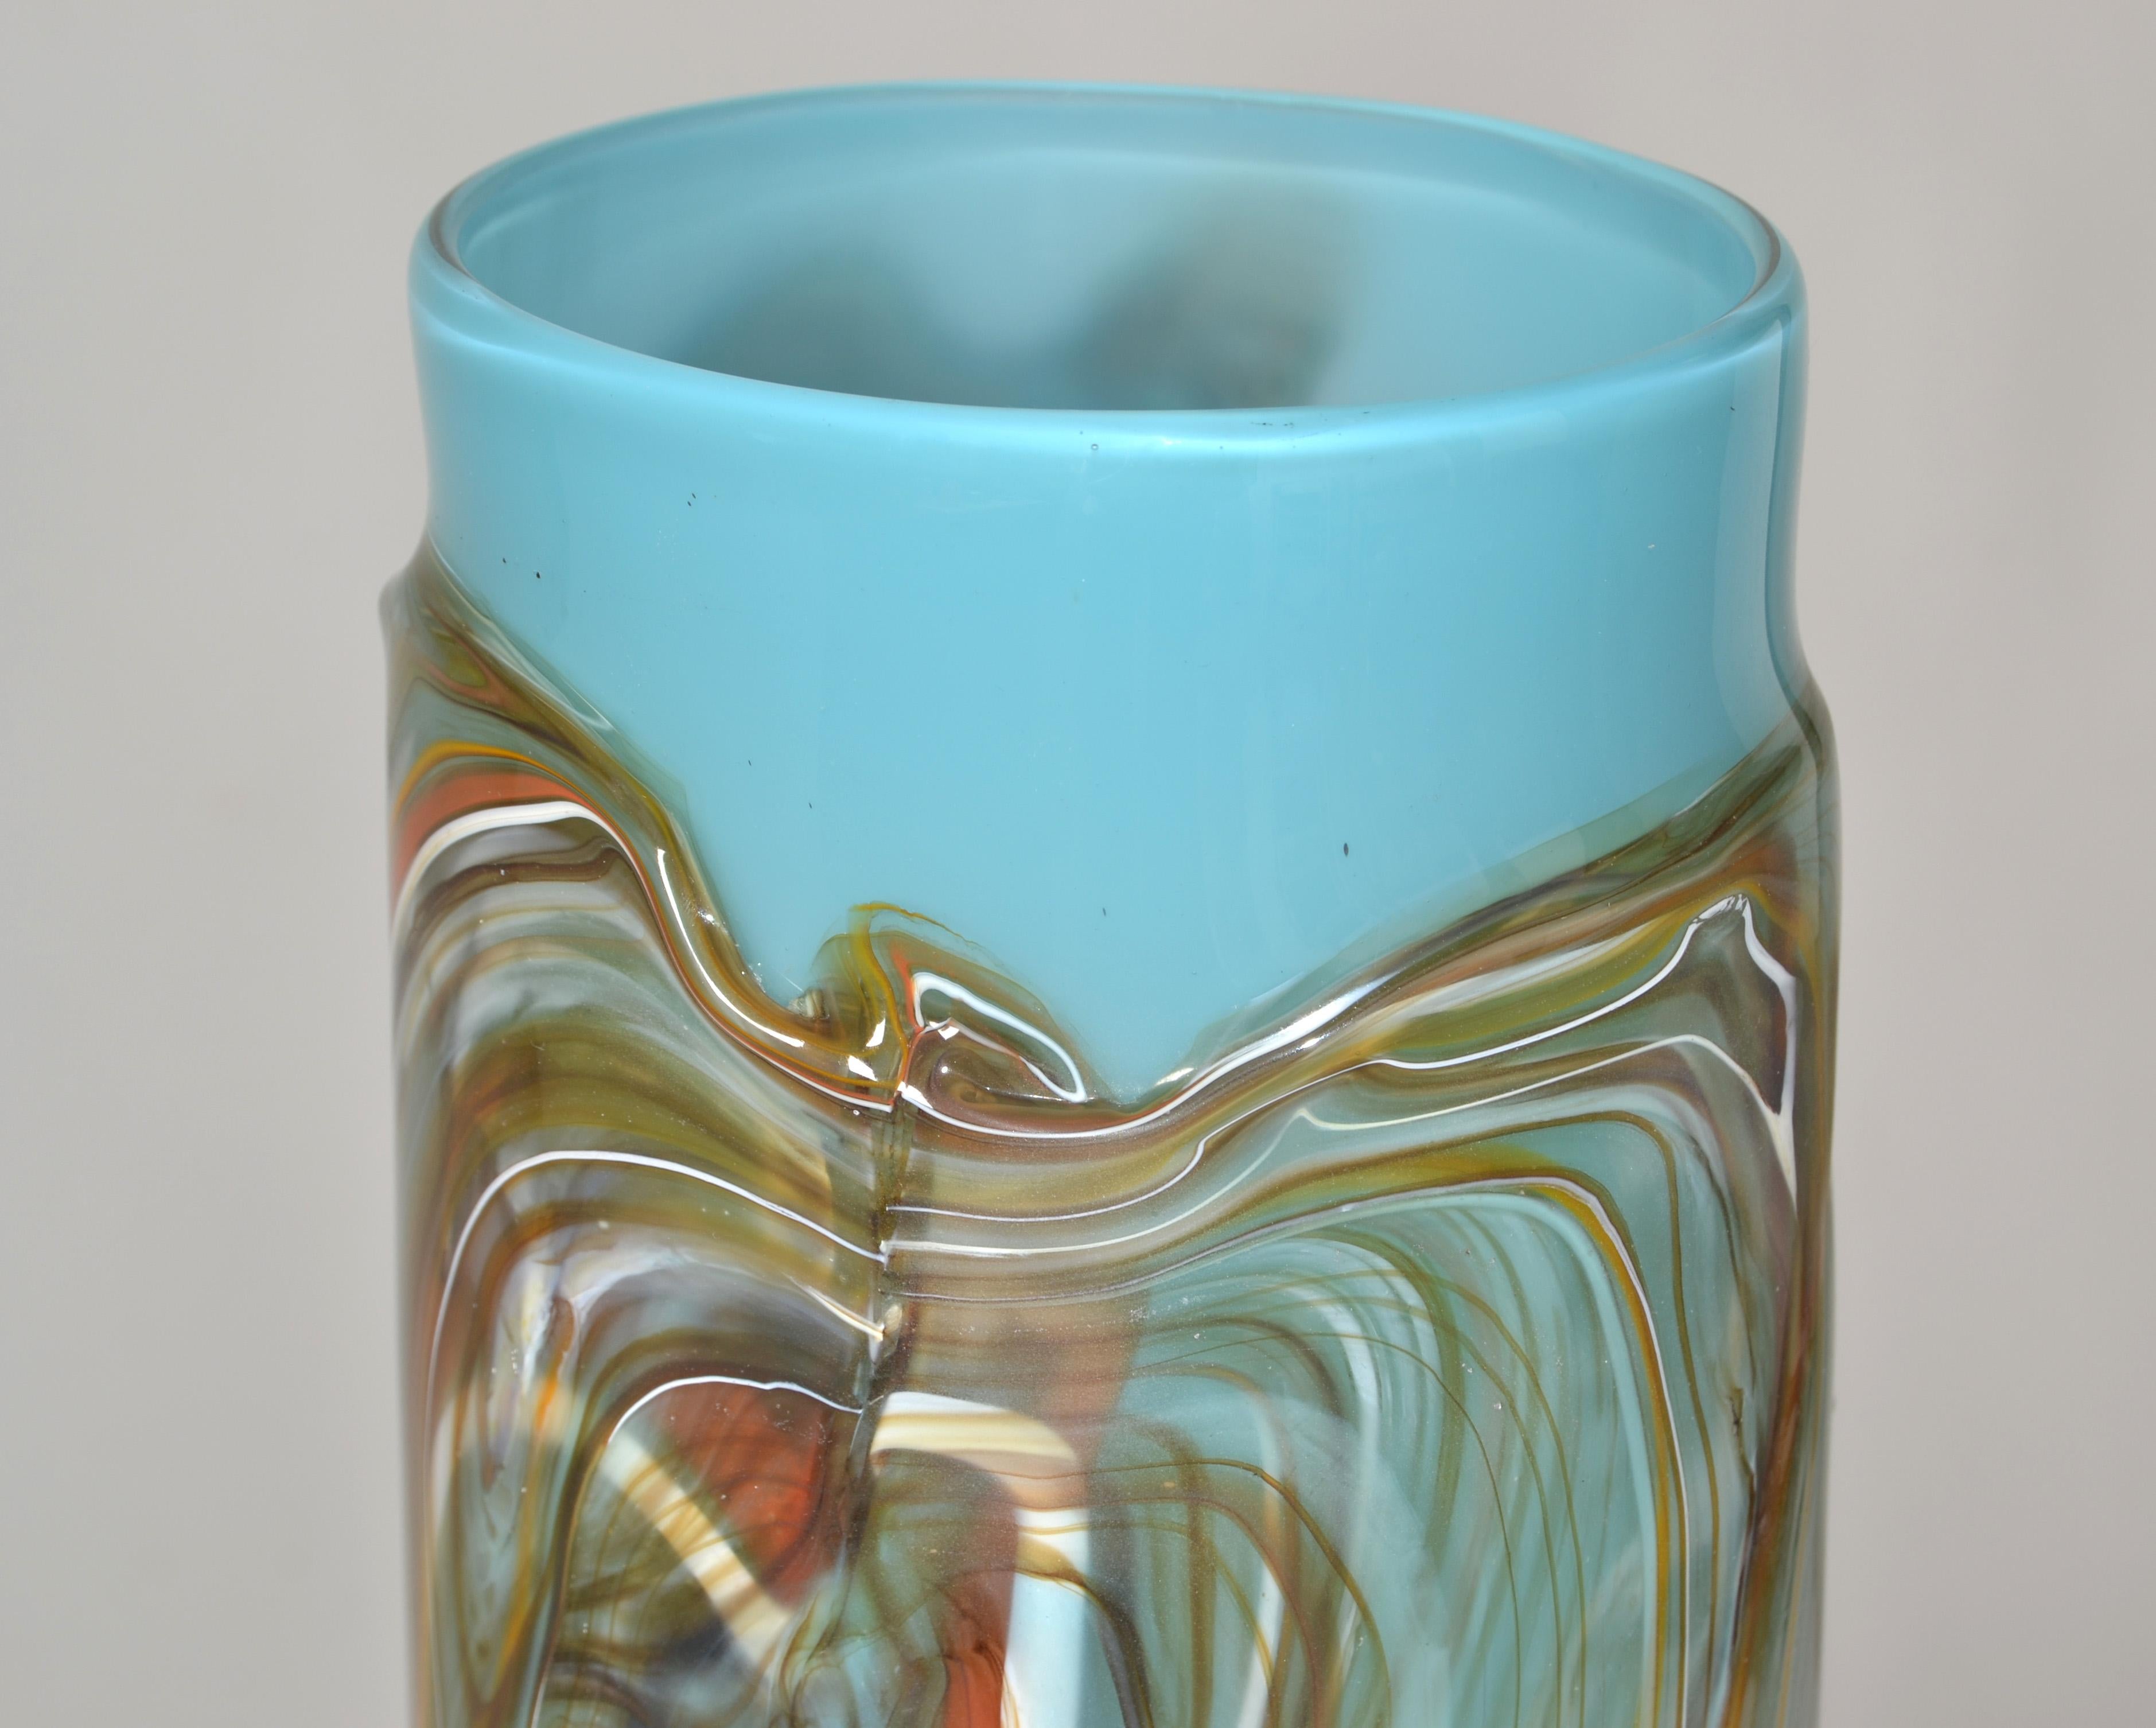 Vintage Studio Art Blown Glass Heavy Vase Vessel Turquoise and Hues Brown 1975 For Sale 3